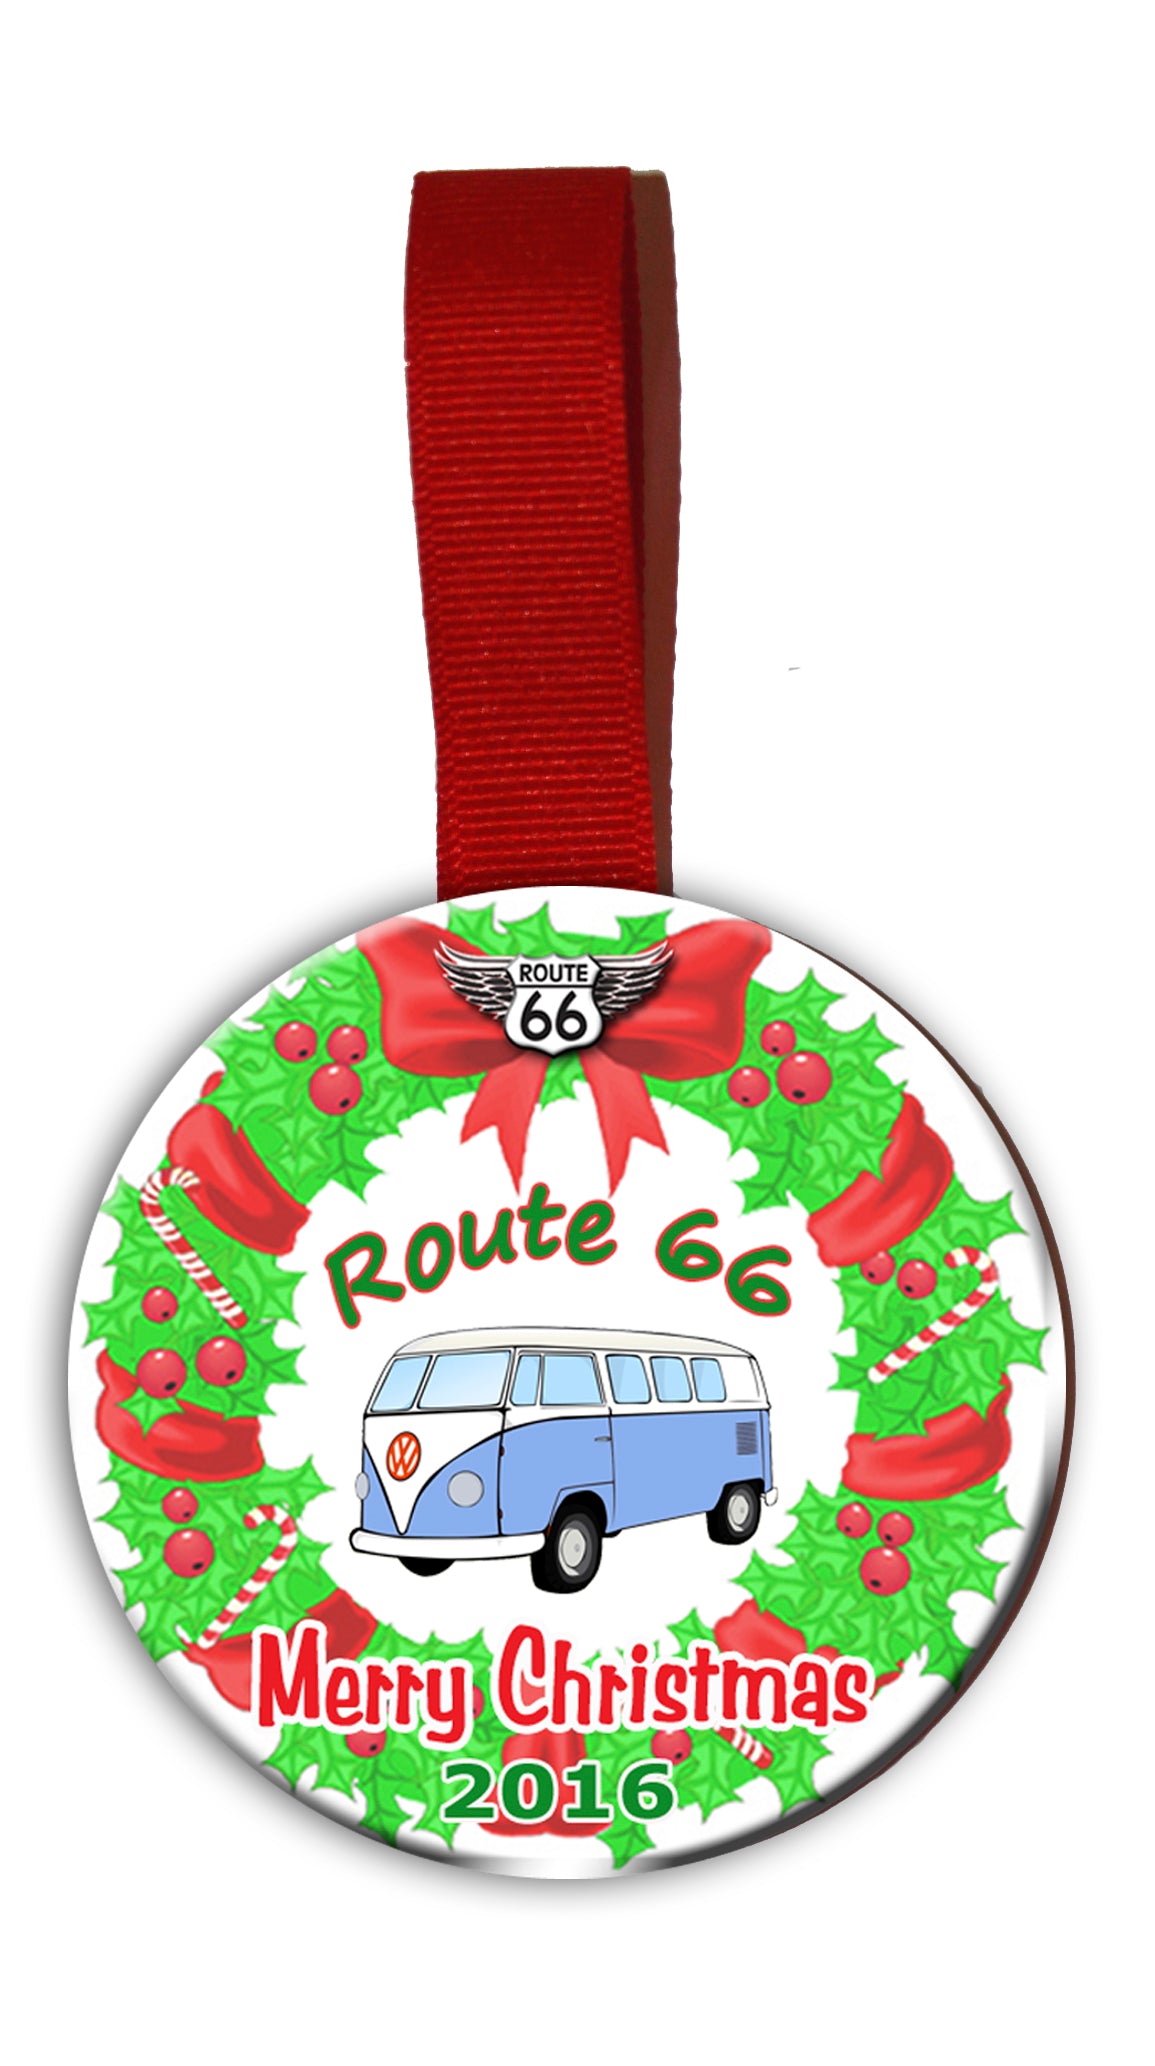 Route 66 Christmas Tree Ornament with VW Van Image Inside of Wreath with 66 Logo and Date